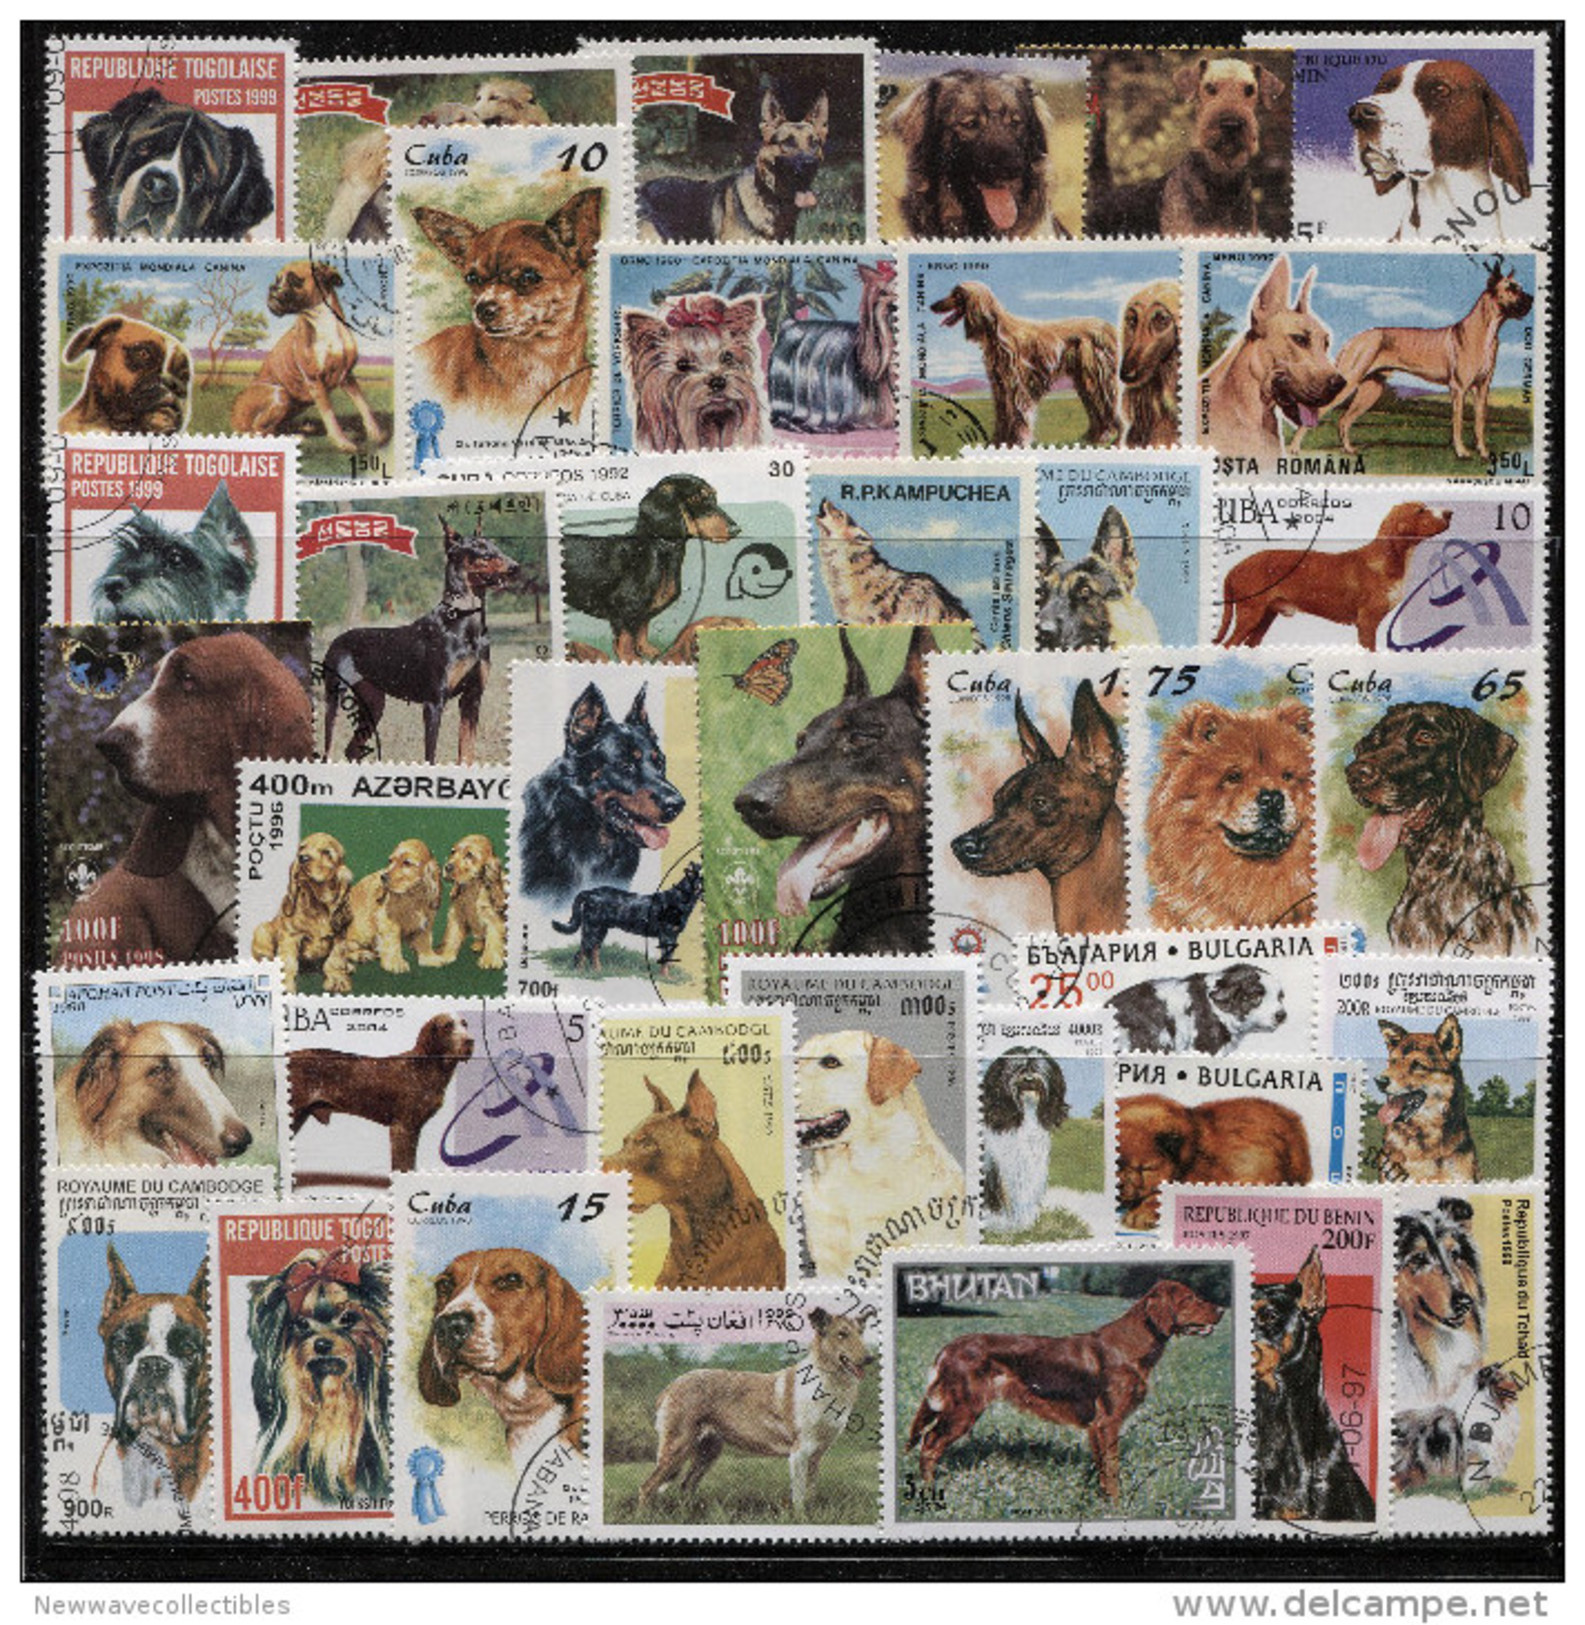 Dogs On Lot Of 100 All Different Large Postage Stamps, Many Countires, Used In Good Codition. - Farm